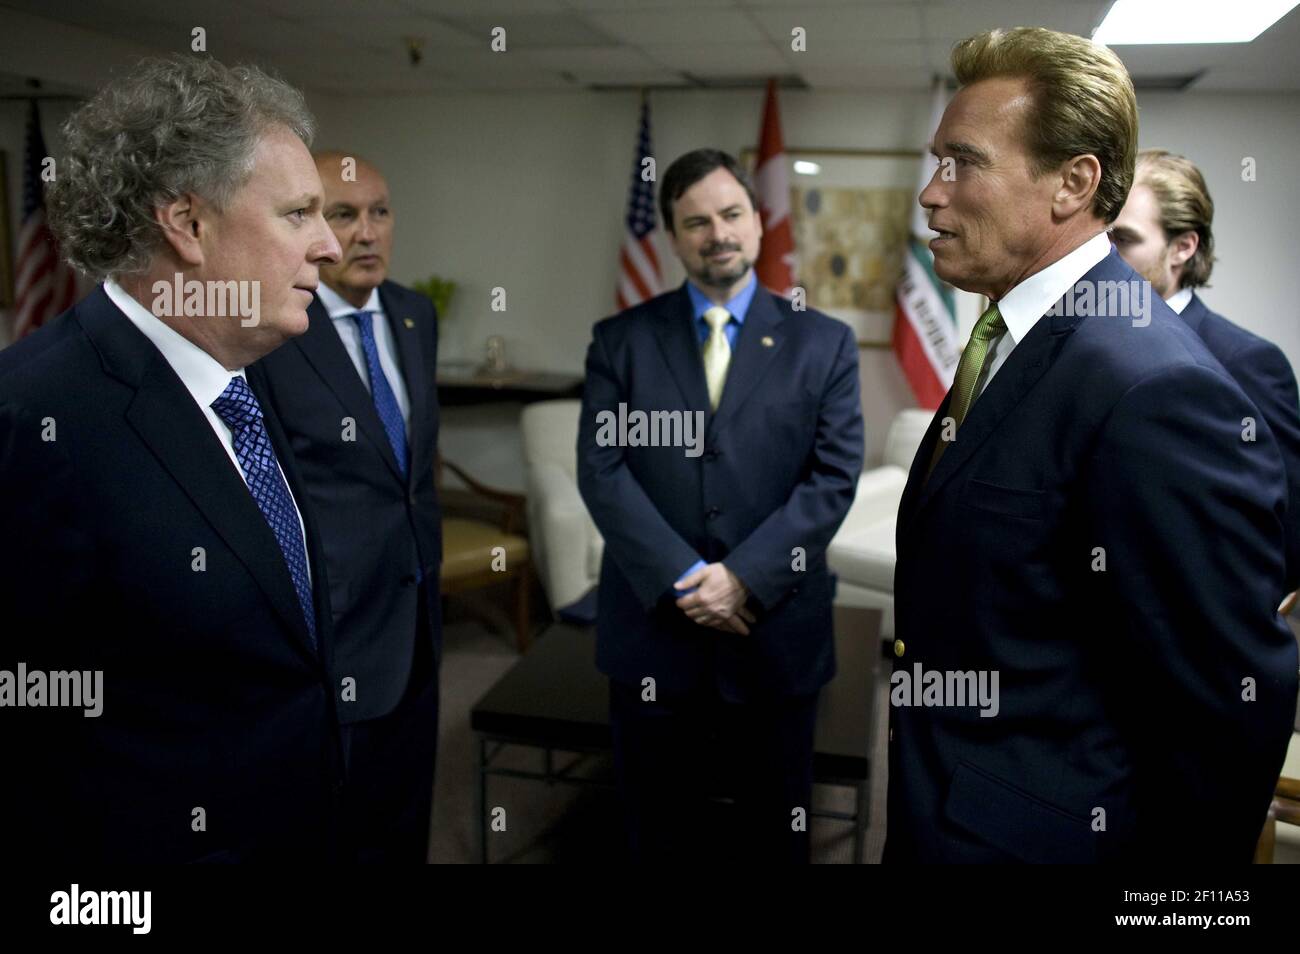 3 October 2009 - Los Angeles, California - Governor Arnold Schwarzenegger meets with Quebec Premier Jean Charest. Governor Schwarzenegger hosted the GovernorsÃ• Global Climate Summit 2 where he joined 30 global leaders in signing an agreement that recognizes the role of subnational governments in the discussions on the next global climate agreement being negotiated in Copenhagen this December. He also participated in a Ã’Breaking the Climate DeadlockÃ“ panel discussion with former United Kingdom Prime Minister Tony Blair and chair of the Intergovernmental Panel on Climate Change Rajendra Pachu Stock Photo